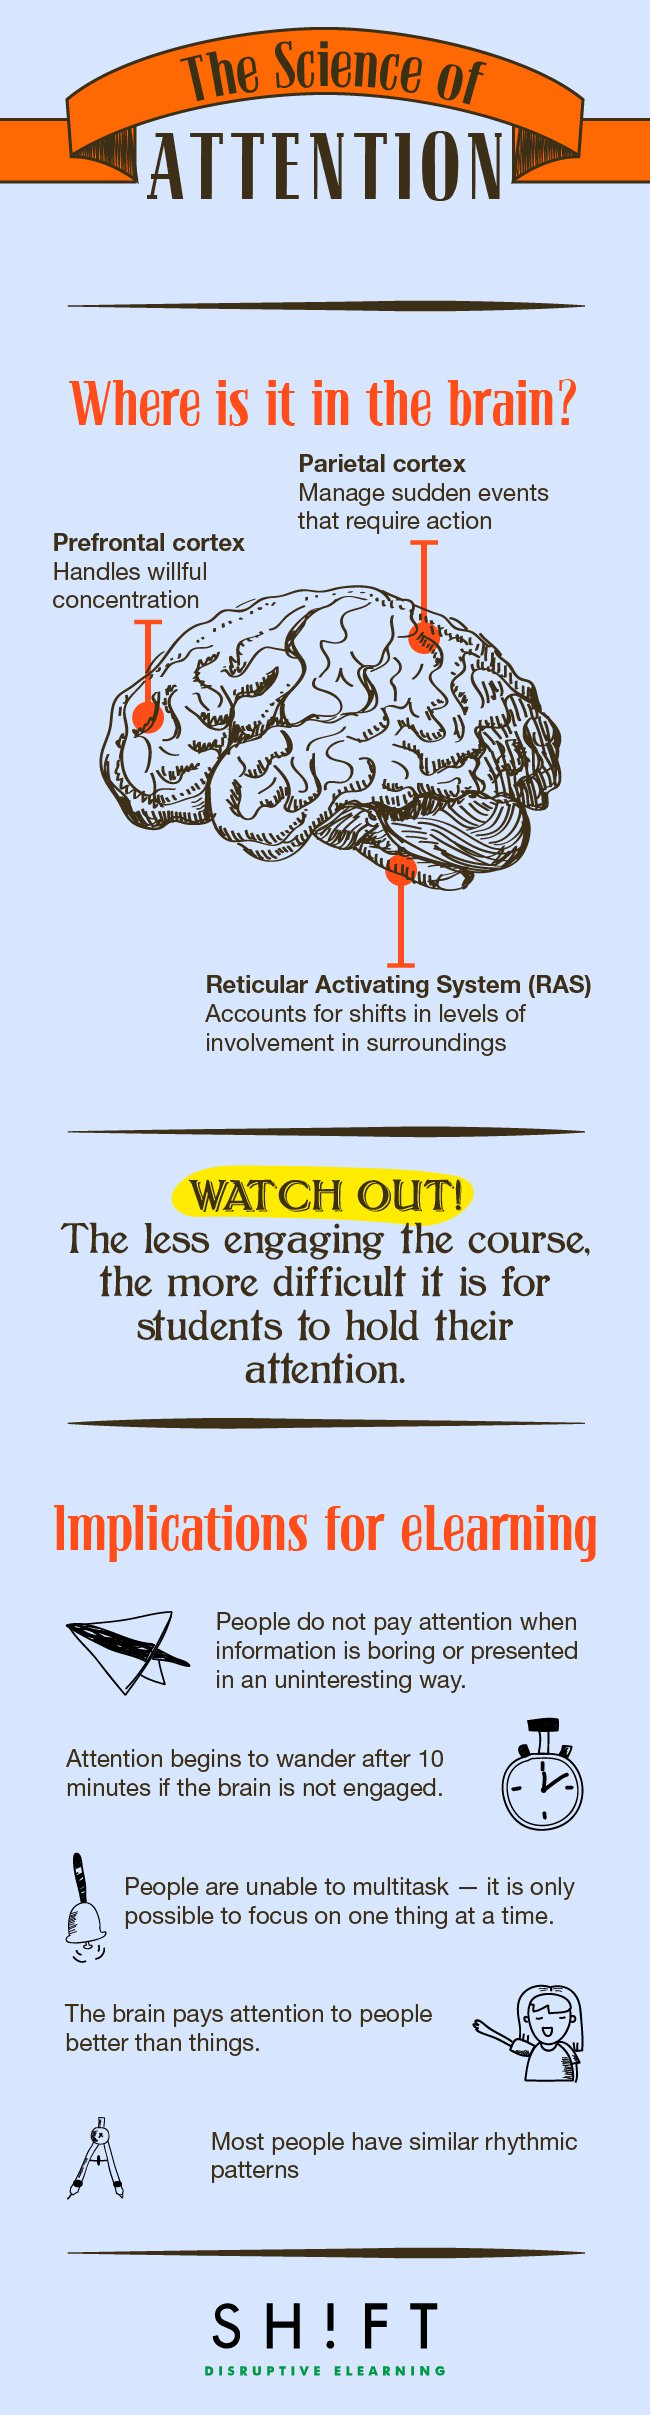 eLearning and the science of attention